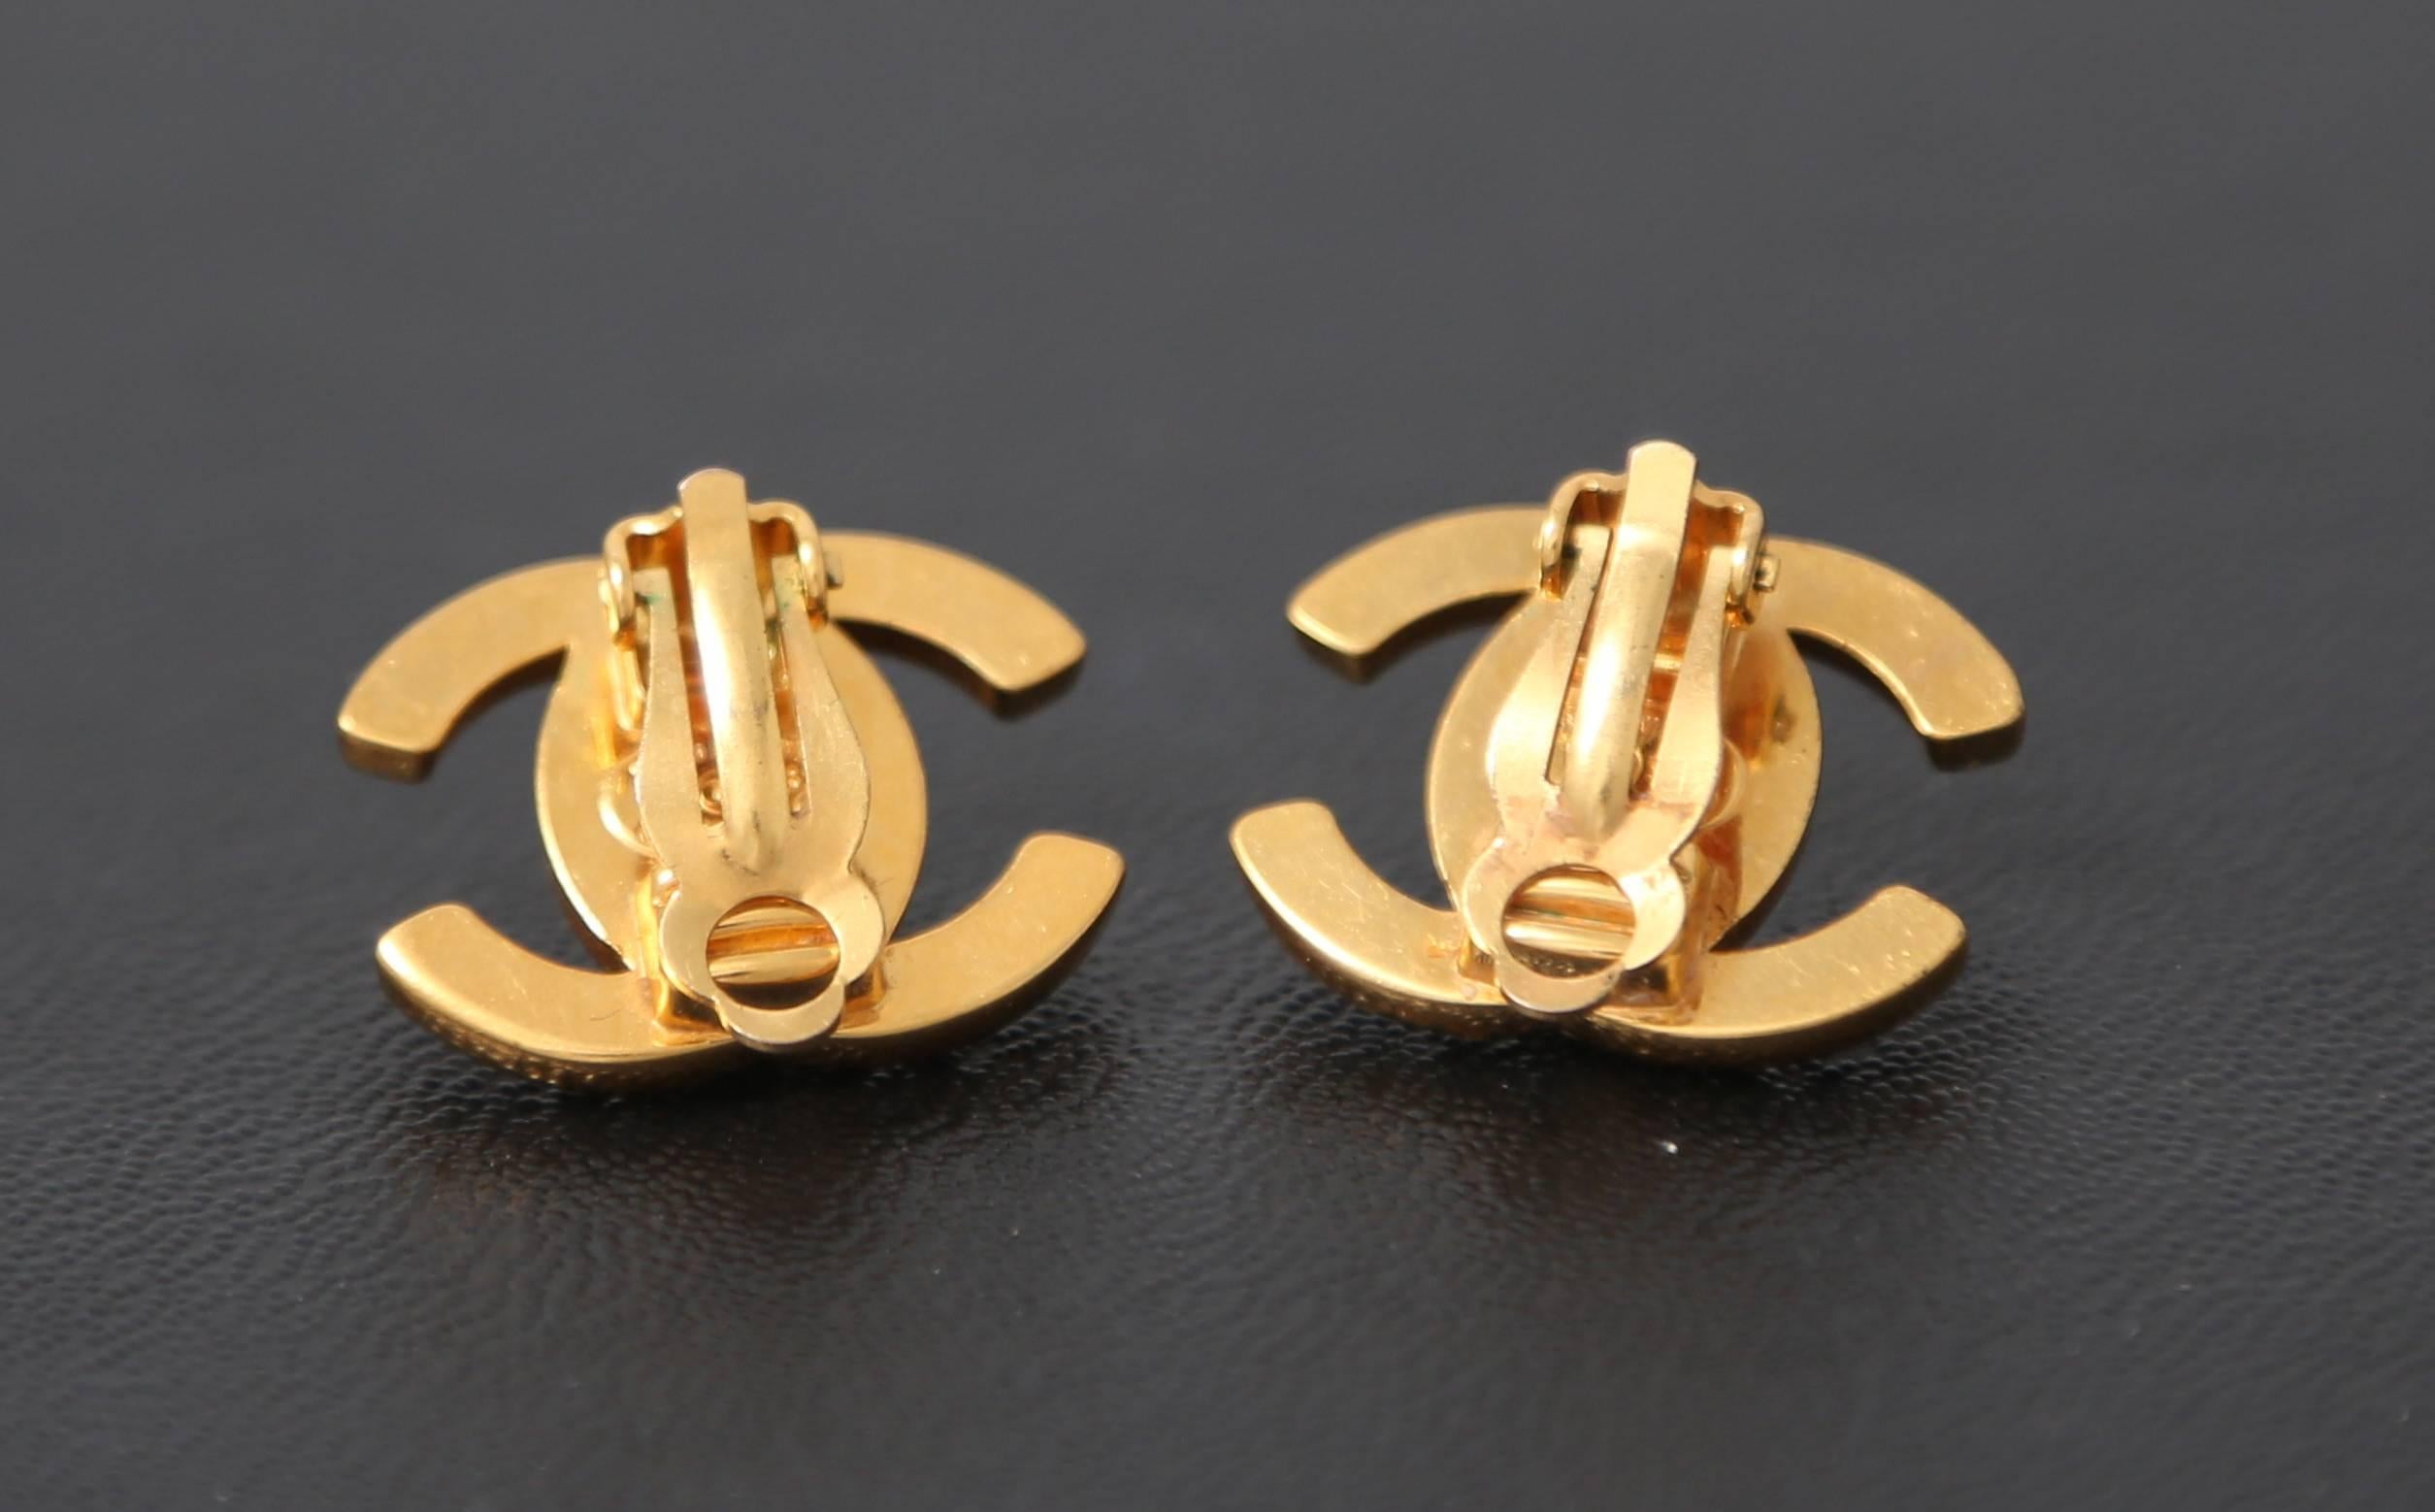 Vintage 1990s Chanel Gold plated and crystal clip on earrings in the classic CC twist lock logo complete with diamantes throughout. 

Length – 2 com 
Height 1.5 cm
